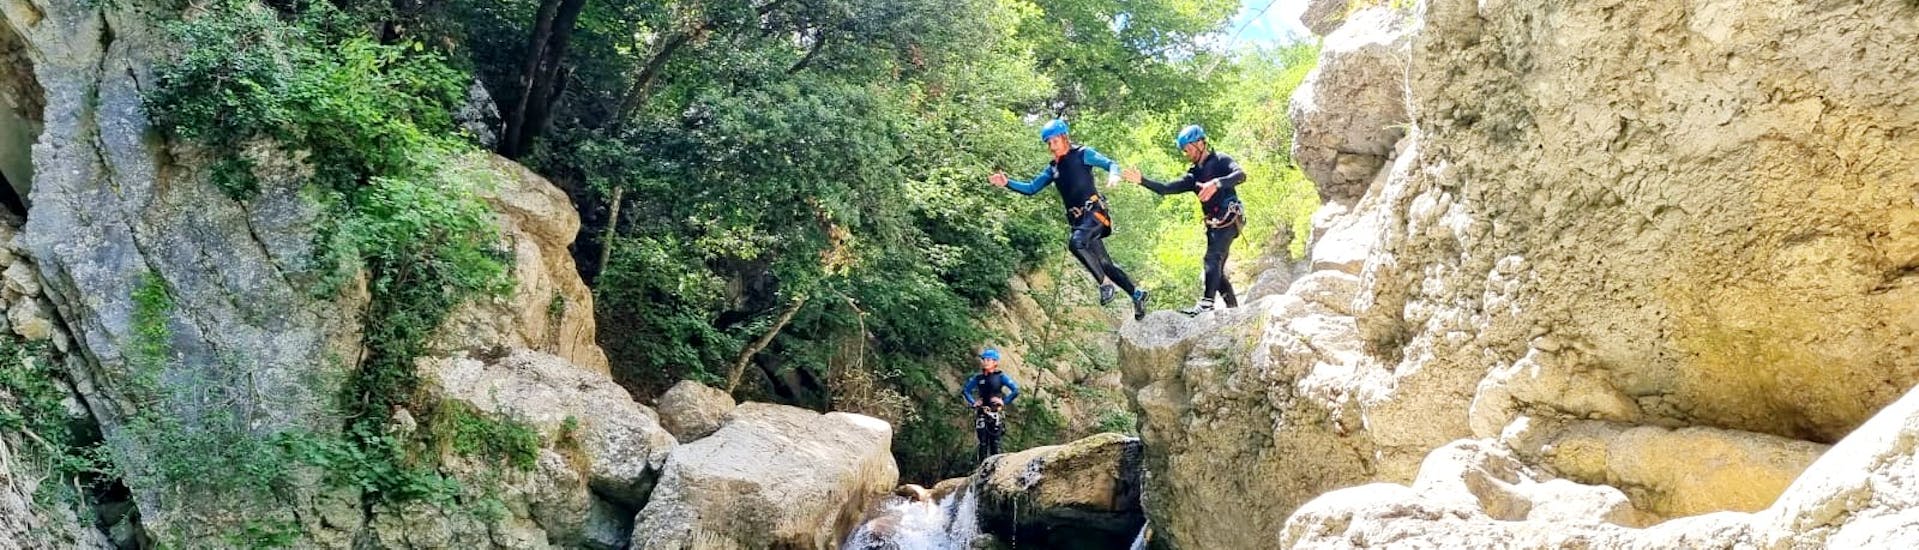 Participant jumping off a rock during the Canyoning tour in the Gours du Ray near Nice with Canyons Experience Nice.